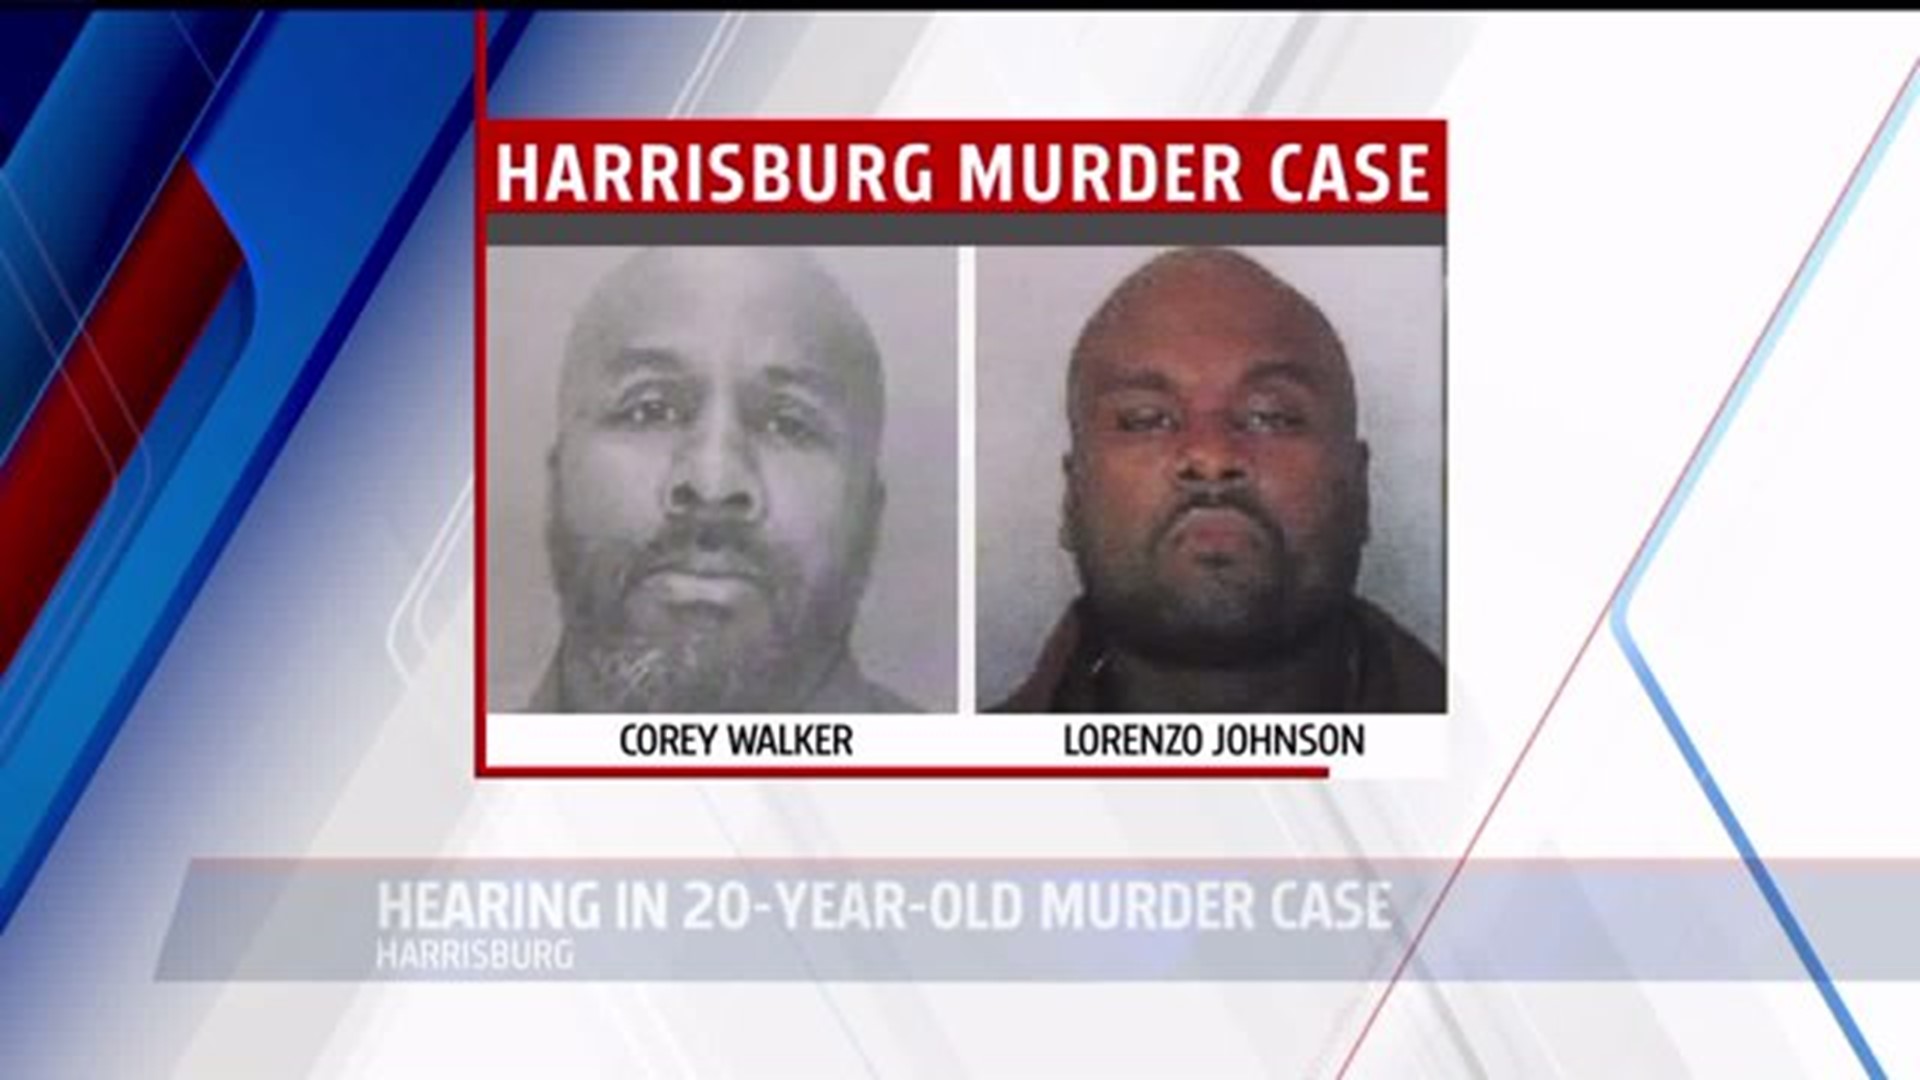 20-year-old murder case subject of court hearing in Harrisburg